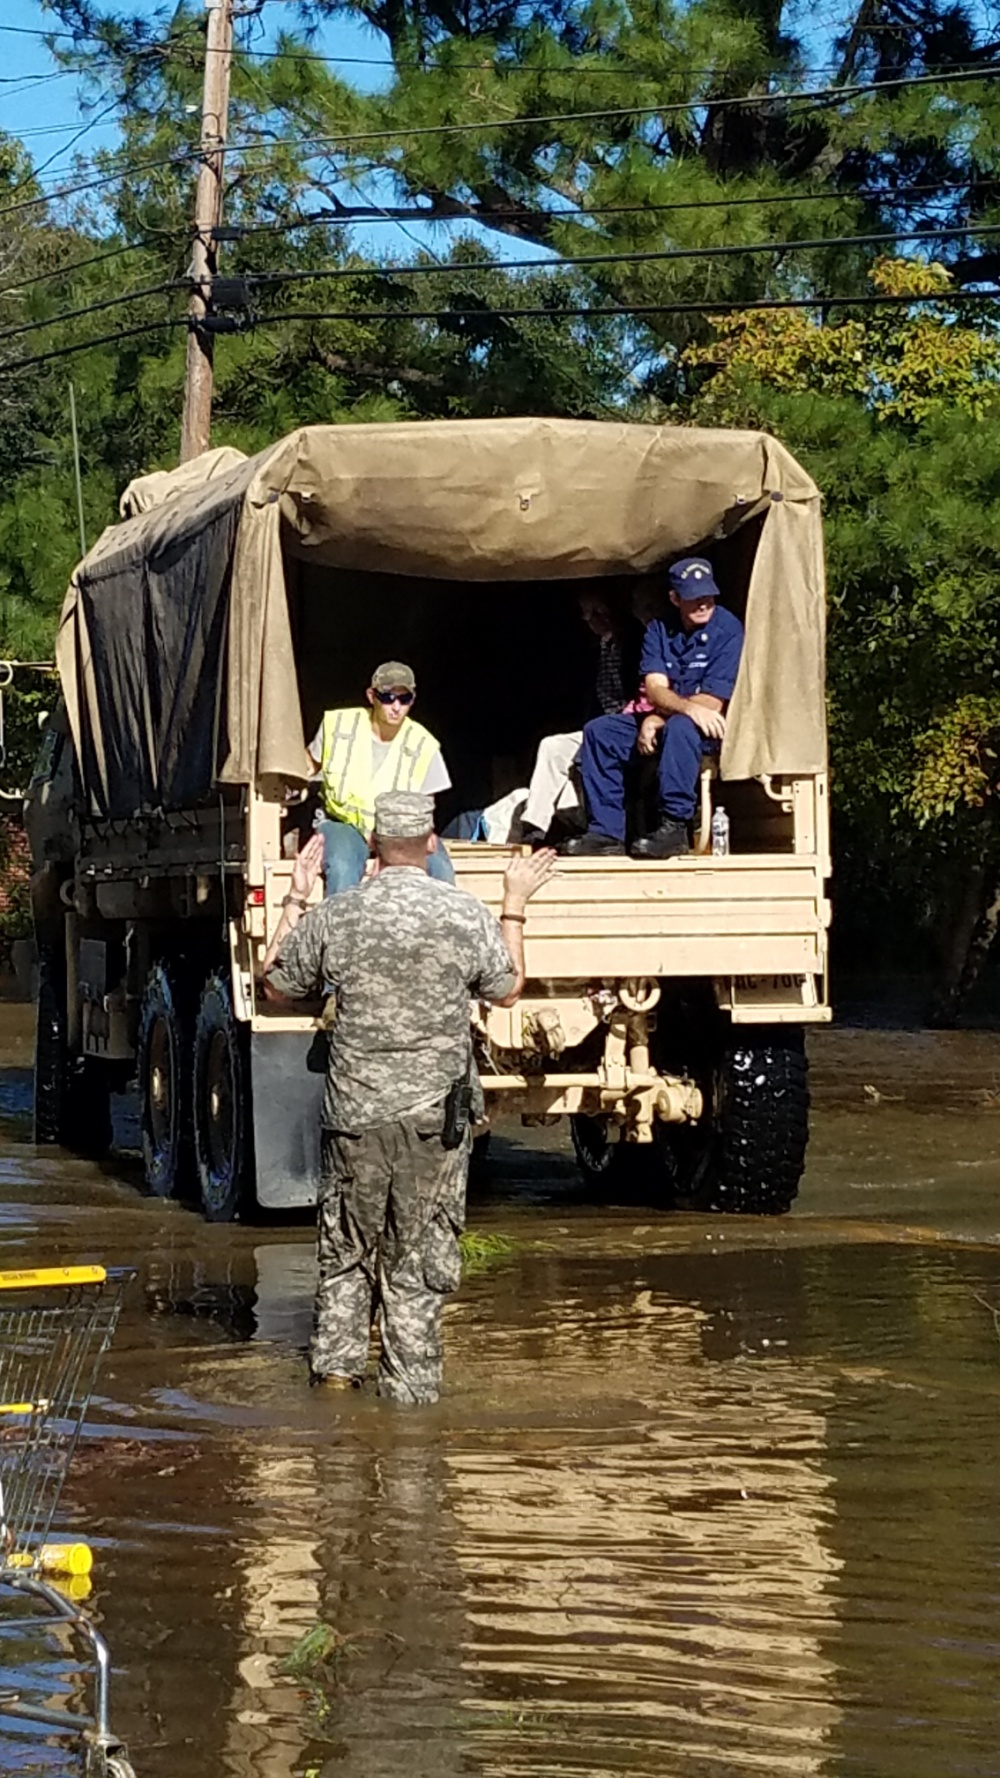 Master Chief Petty Officer Louis Coleman (right) sits with flood survivors and rescuers on a North Carolina Air National Guard 236th Brigade Engineer Battalion M35 2-ton cargo truck in Lumberton, North Carolina, Oct. 10, 2016. The Lumber River flooded the city after Hurricane Matthew. (U.S. Coast Guard photo by Petty Officer 1st Class James Prosser/Released)